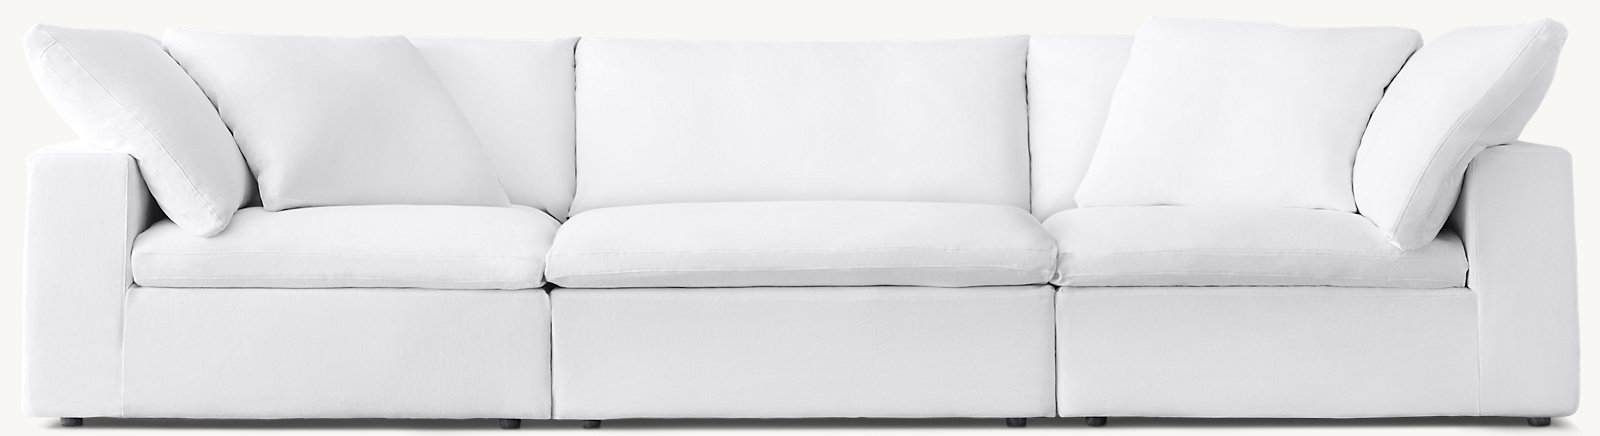 Shown in White Washed Belgian Flax Linen; preconfigured sofa consists of 2 corner chairs and 1 armless chair. Cushion configuration may vary by component.